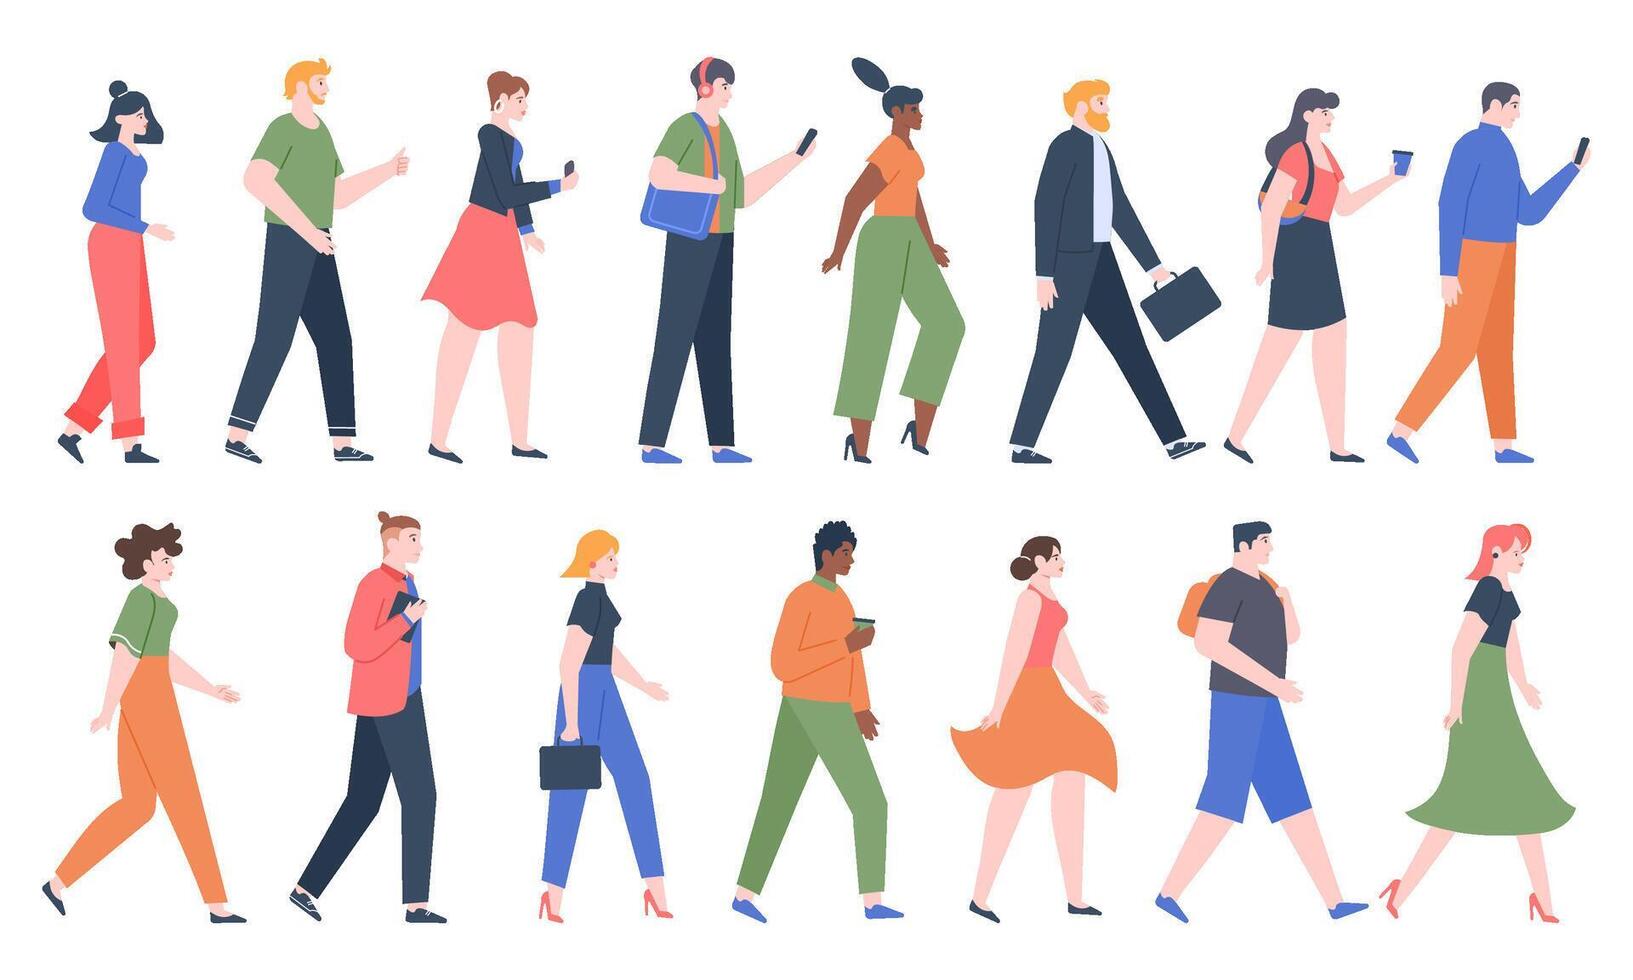 Walking people. Business men and women walk side profiles, people in seasonal and office clothes. Young and elderly moving stylish characters vector illustration set